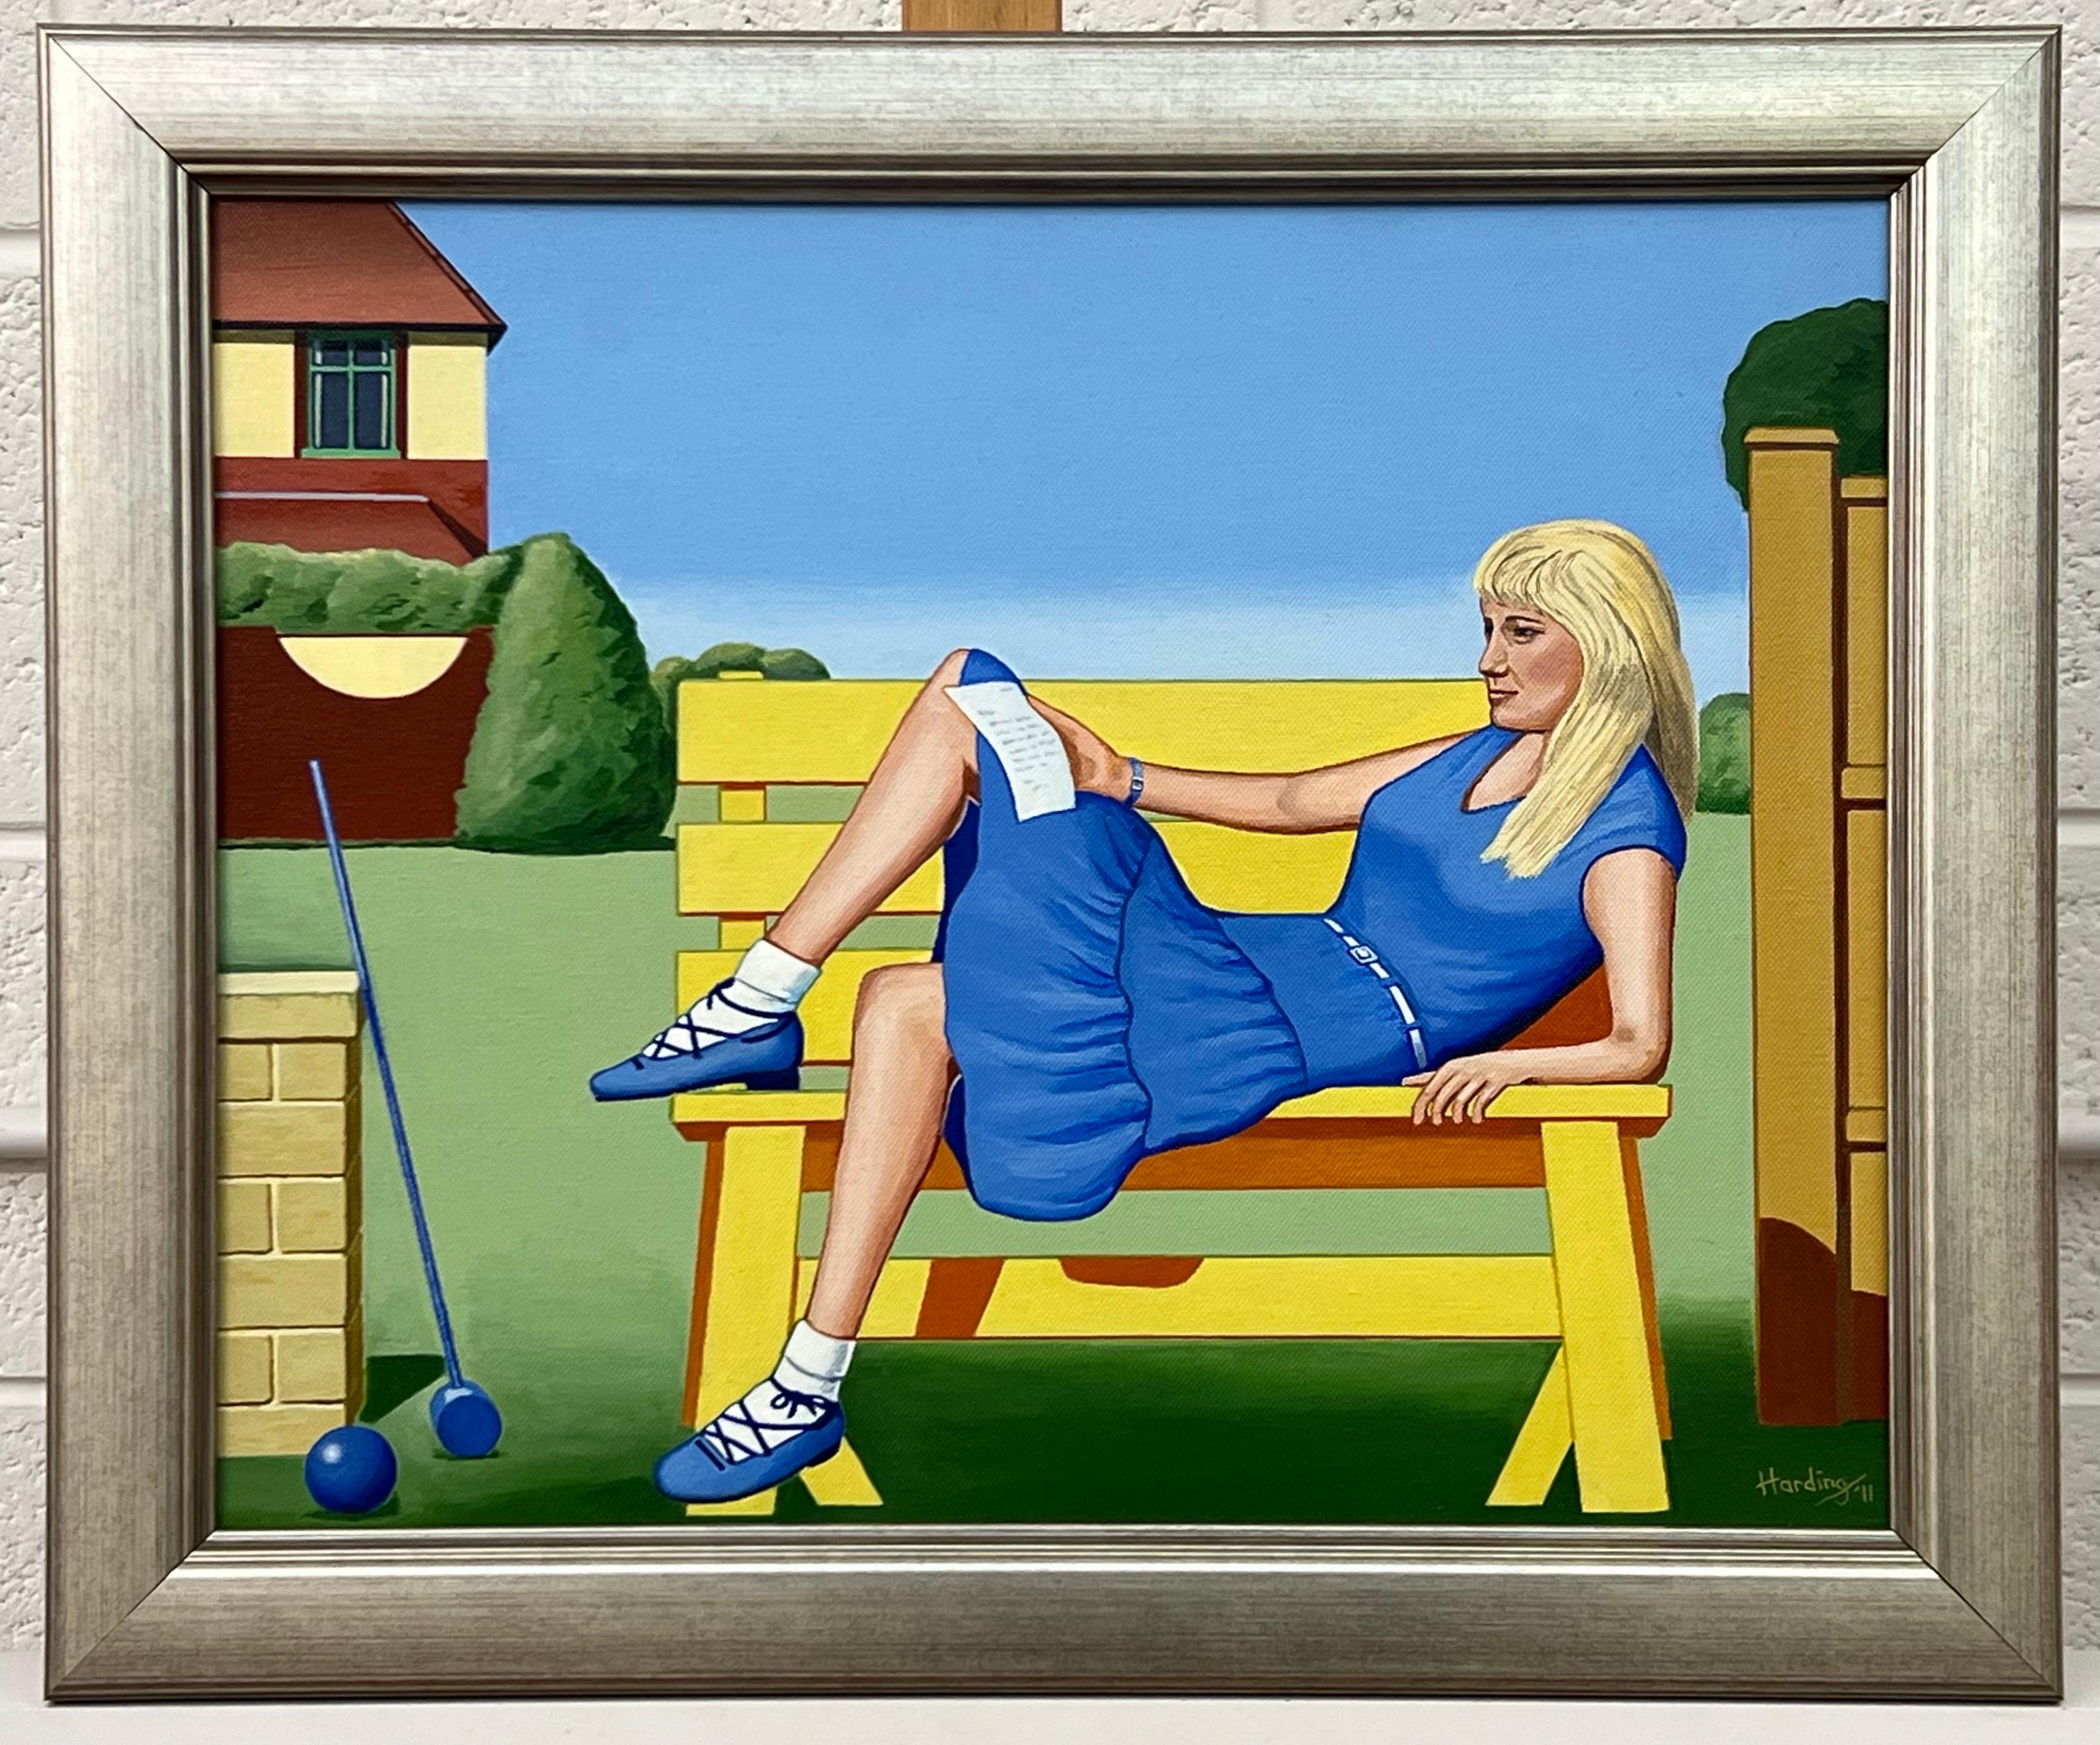 Vintage English Woman in Dress on Park Bench in Suburbia 1960's 1970's England, entitled 'Summertime Blues' by Retro Nostalgic Artist, Paul F Harding. Signed, Original, Oil on Canvas. Presented in a silver frame. 

Art measures 16 x 20 inches
Frame